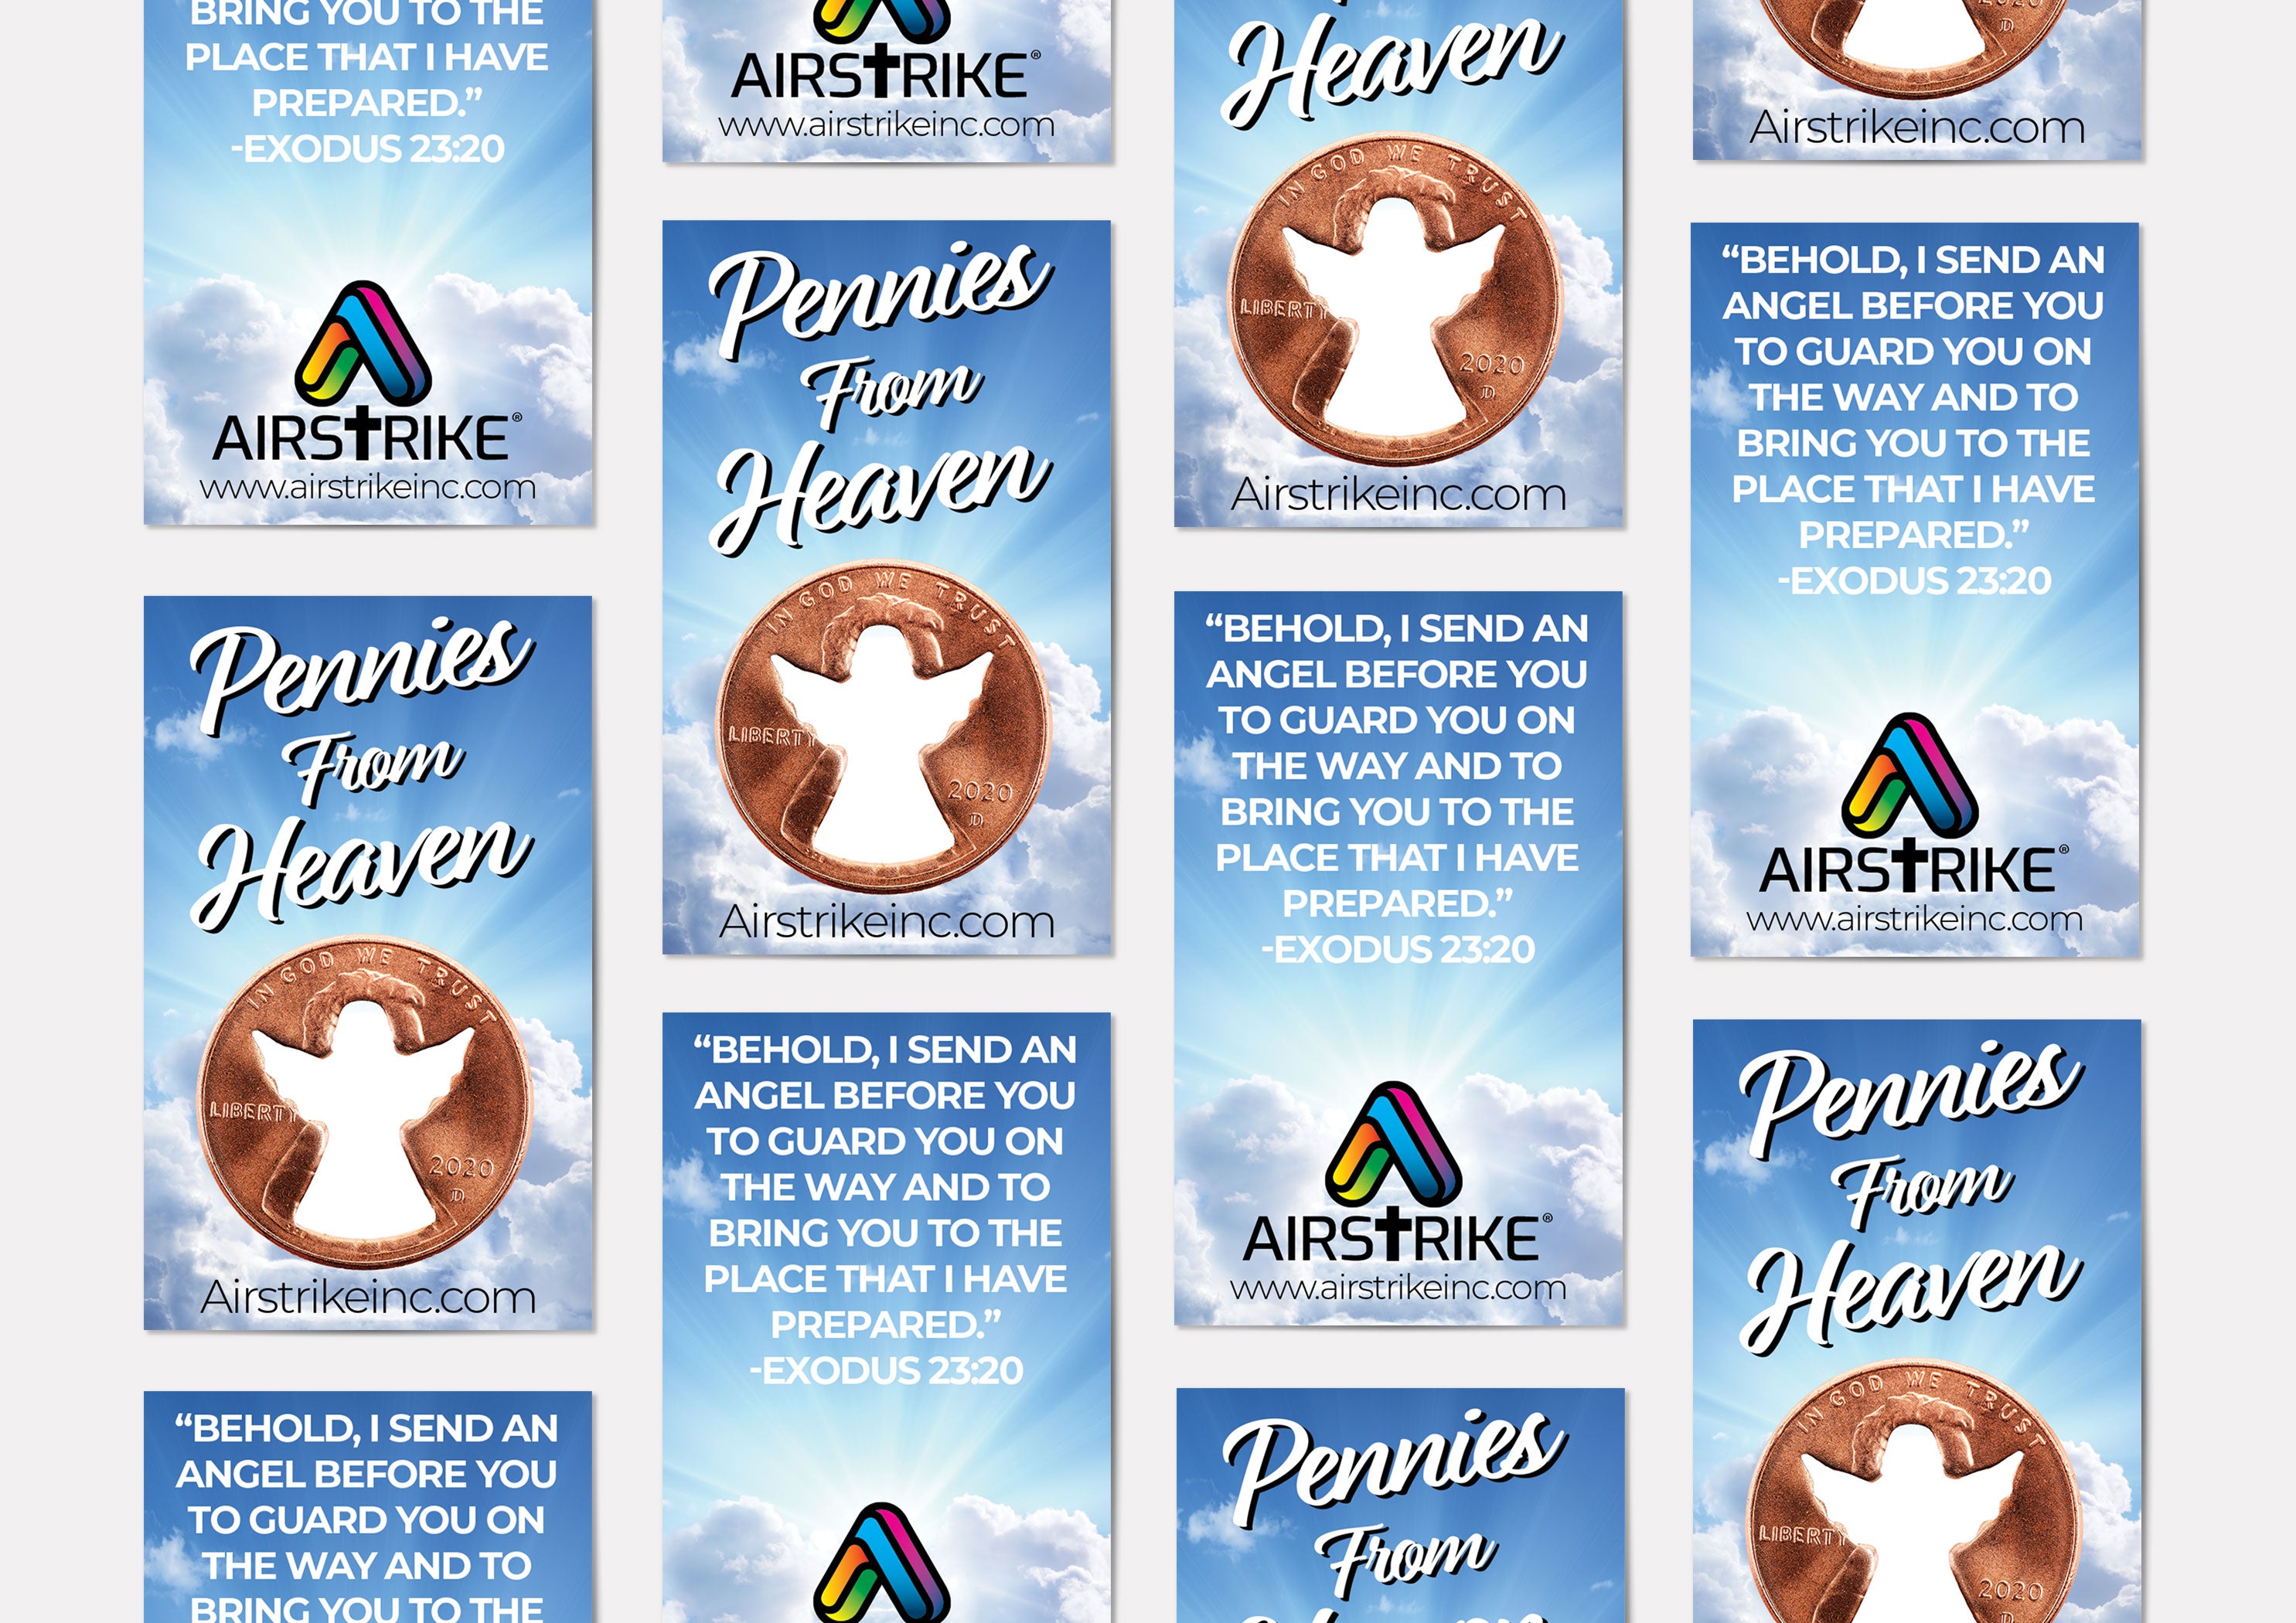 Angel Pennies From Heaven Card - Guard